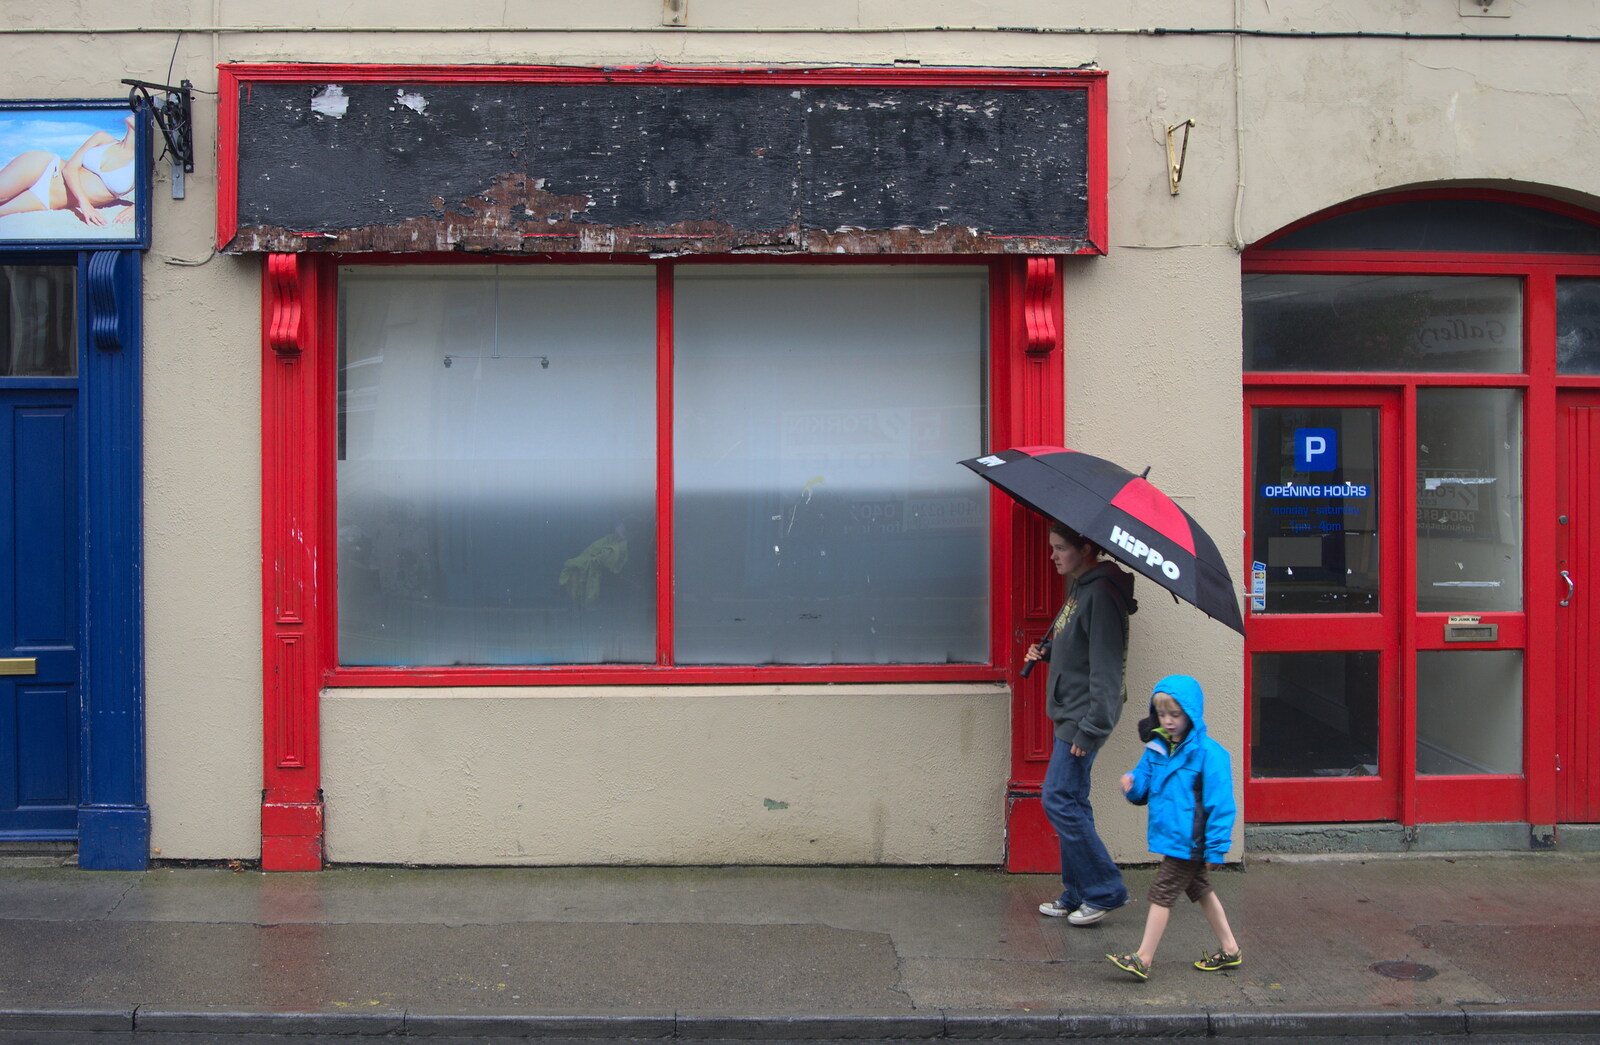 Isobel and Fred walk past an empty shop from Camping at Silver Strand, Wicklow, County Wicklow, Ireland - 7th August 2014